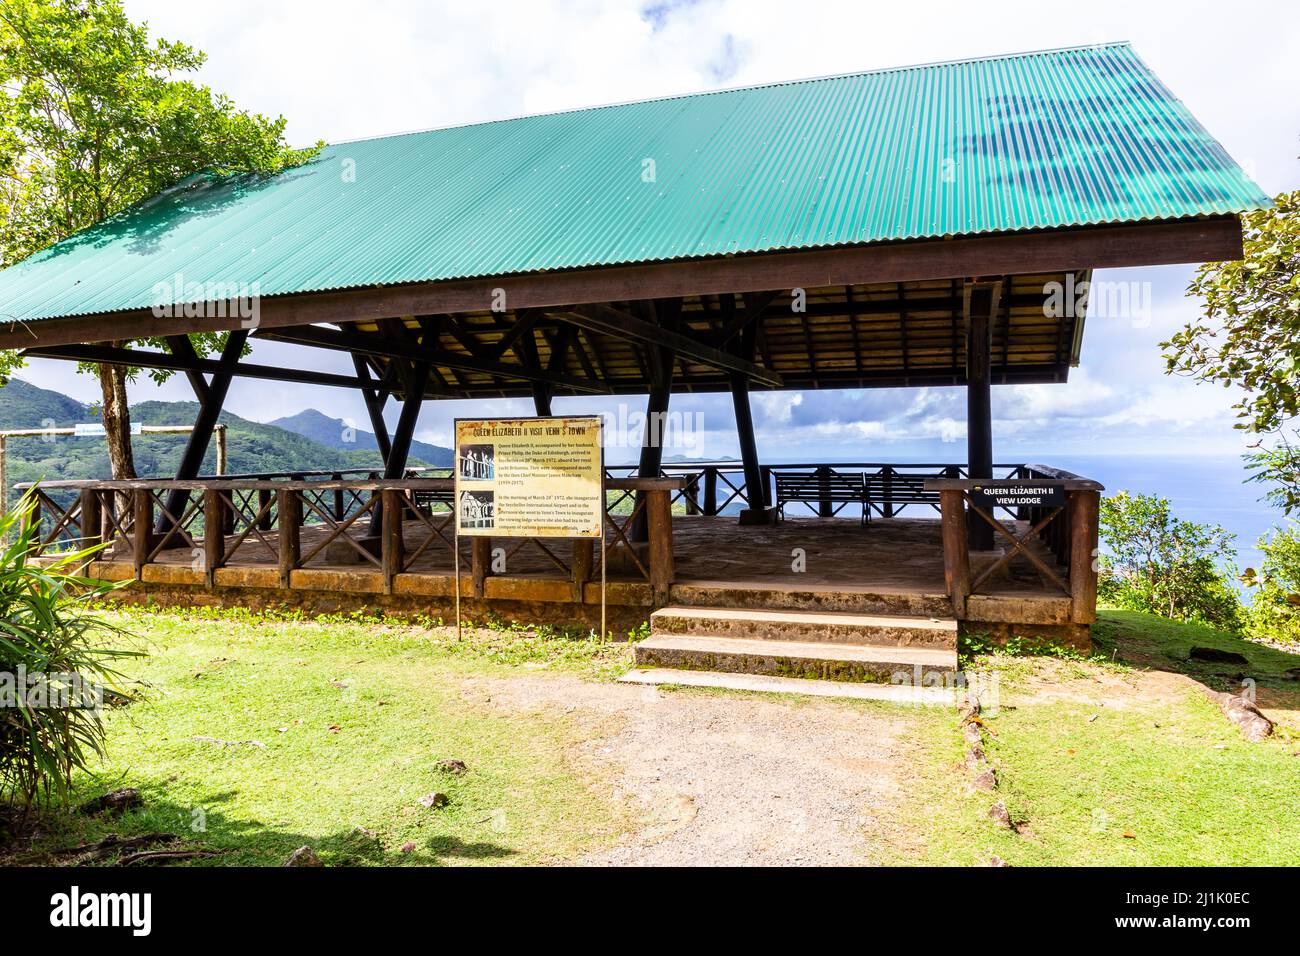 Mahe, Seychelles, 3.05.2021. Venn's Town - Mission Lodge wooden viewing platform with benches and panoramic view overlooking lush tropical forest. Stock Photo